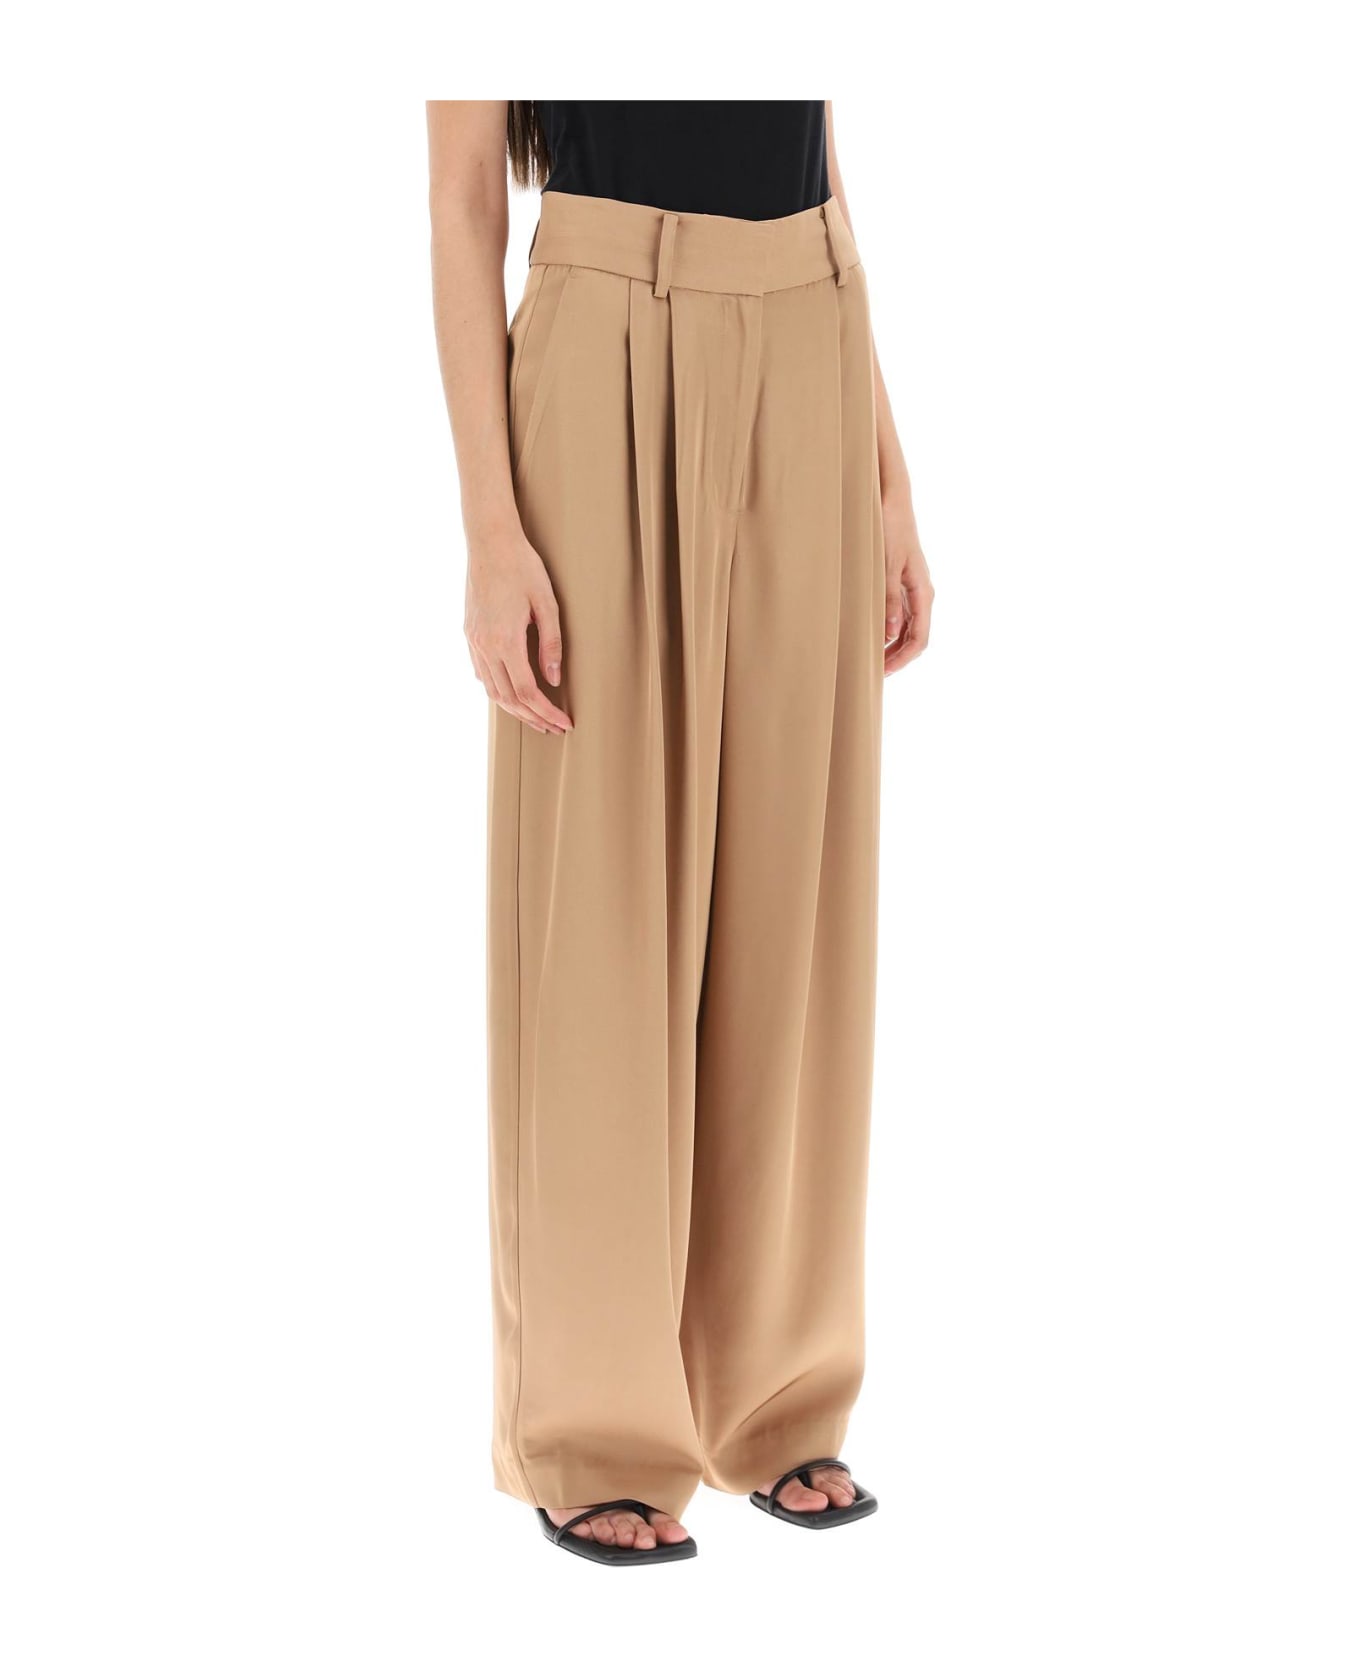 By Malene Birger Piscali Double Pleat Fluid Pants - TOBACCO BROWN (Brown)